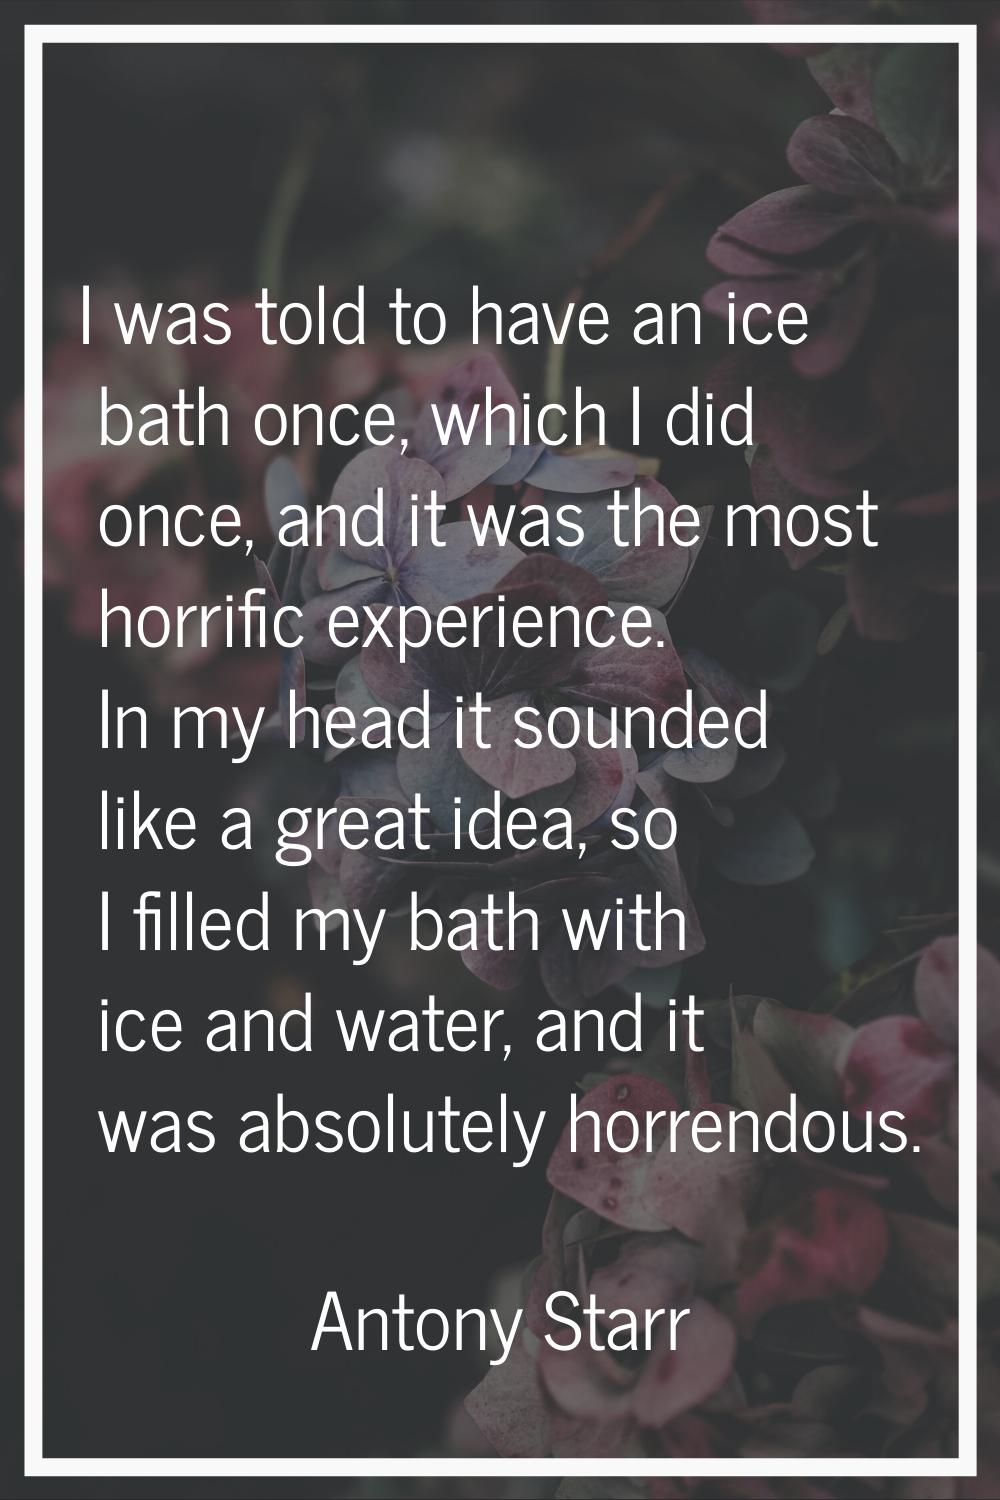 I was told to have an ice bath once, which I did once, and it was the most horrific experience. In 